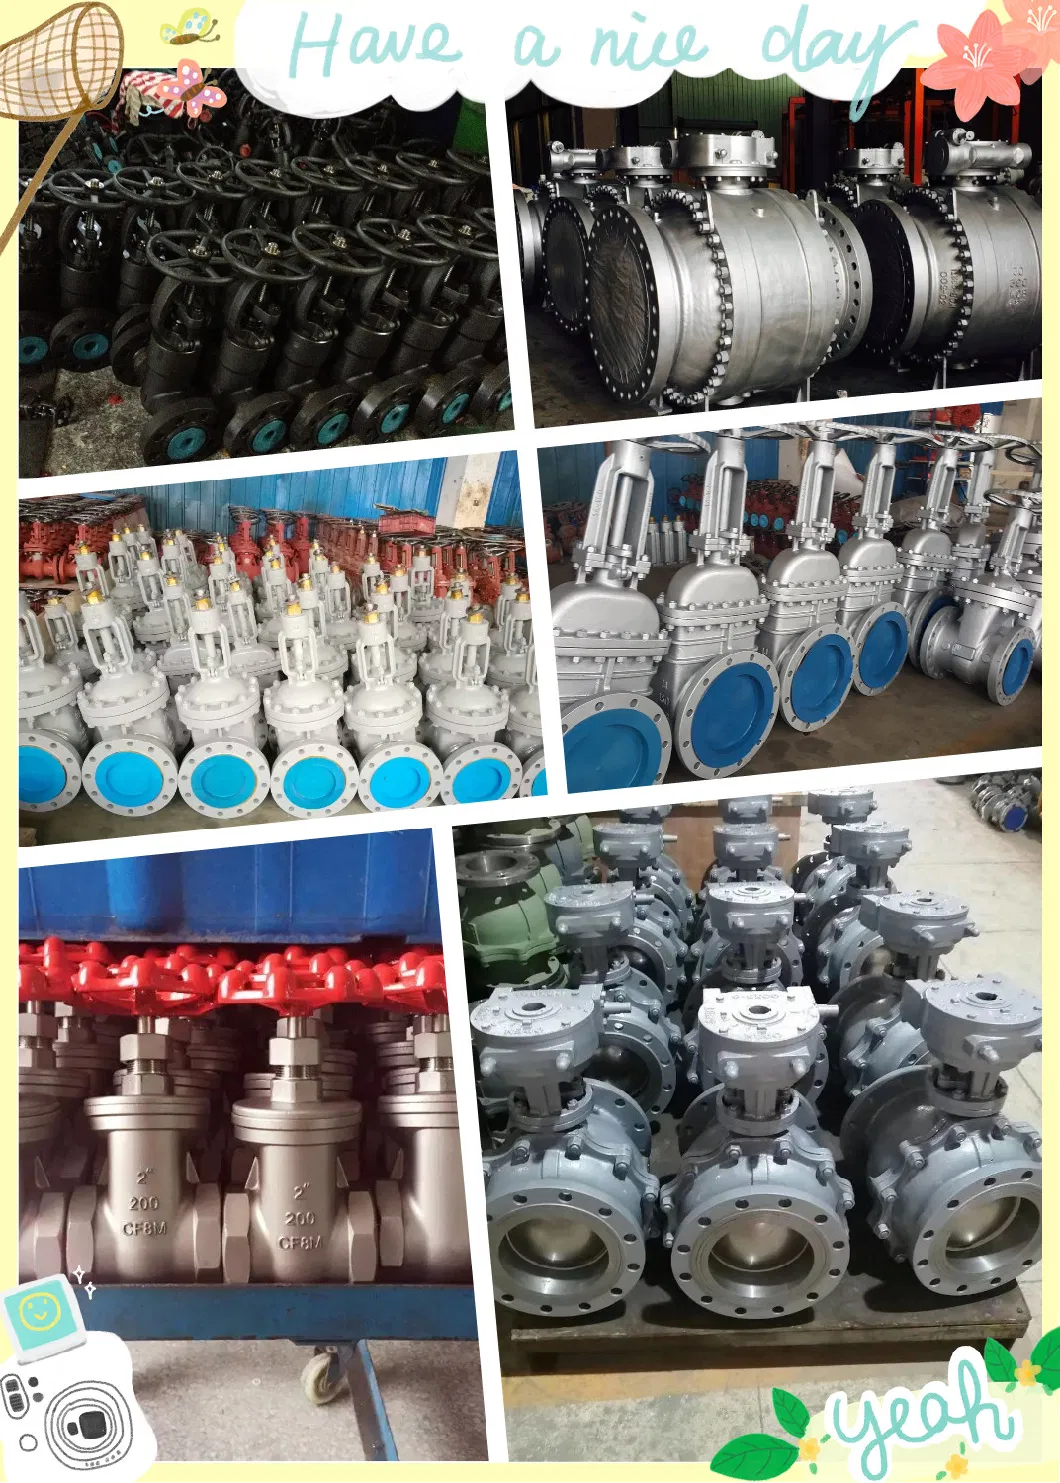 BS1868/API 600 OEM Carbon/Stainless Steel Class 150 Flanged/Welded Bevel Gear Electric/Pneumatic/Hydraulic Industrial Oil Gas Water OS&Y Wedge Globe Valve